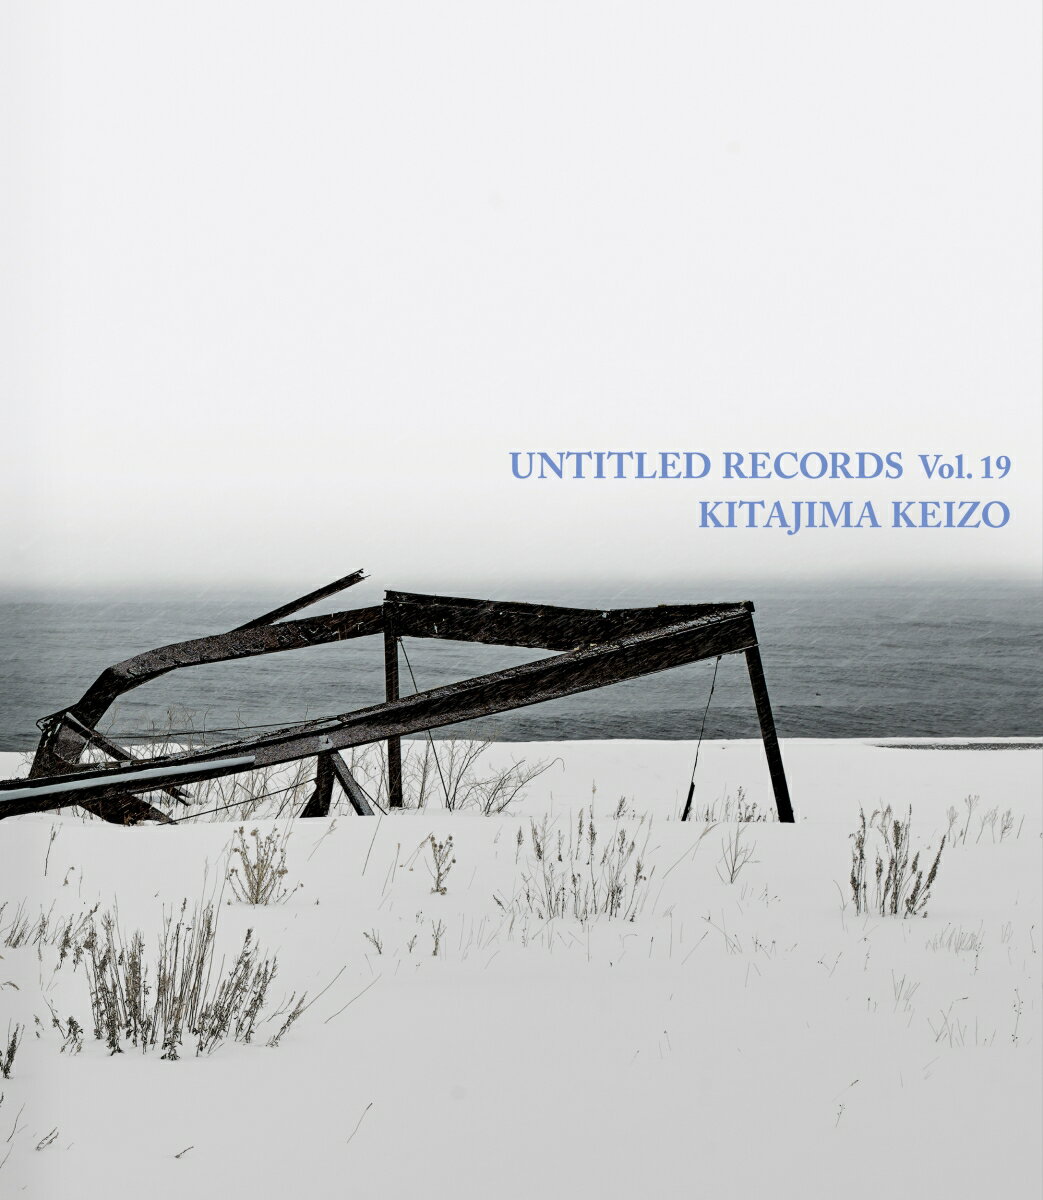 UNTITLED RECORDS Vol.19